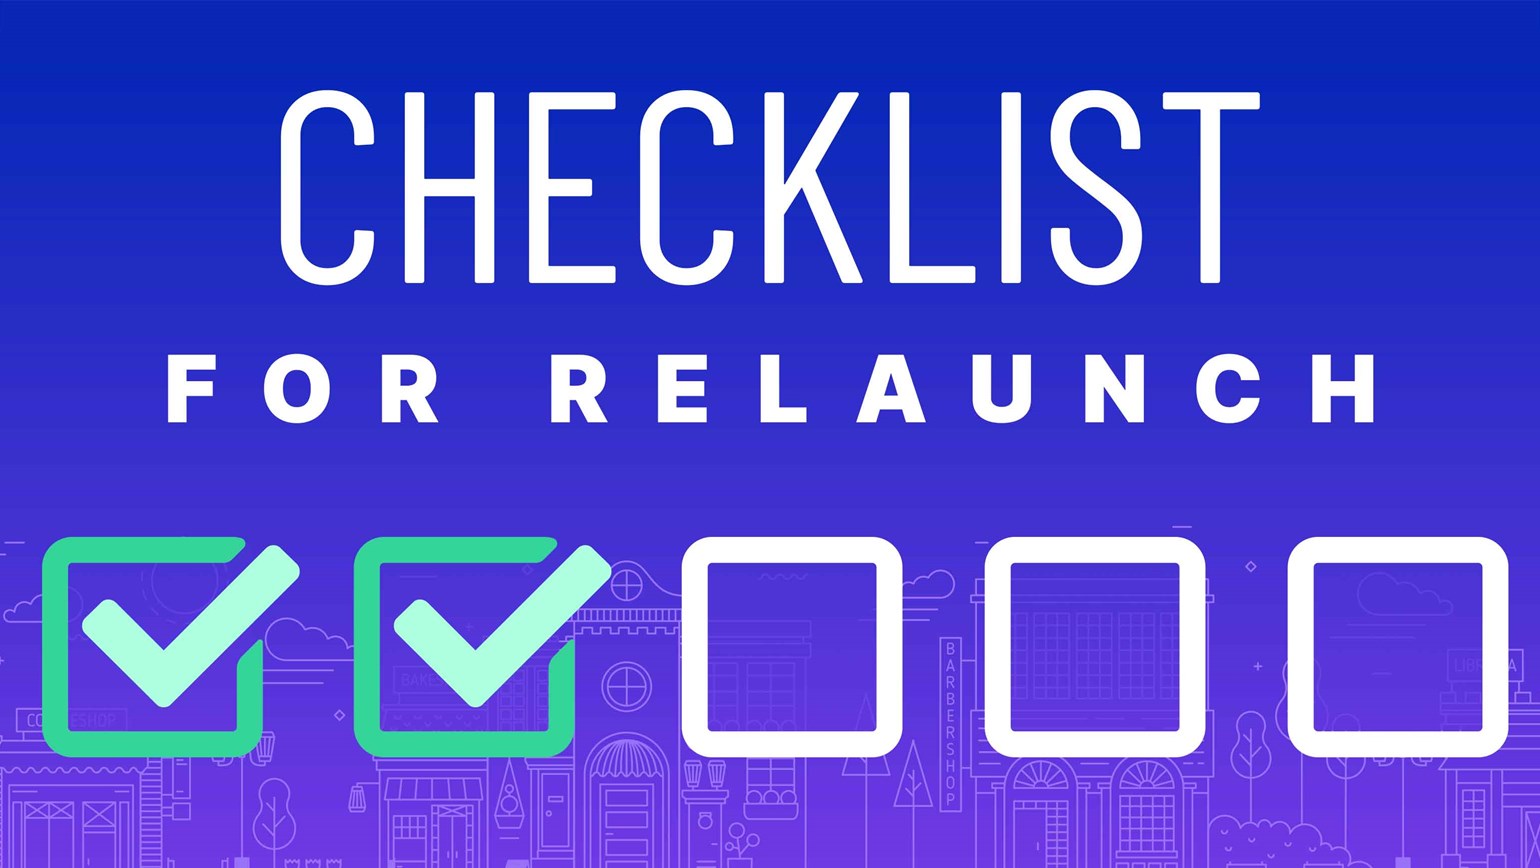 Checklist for Relaunch